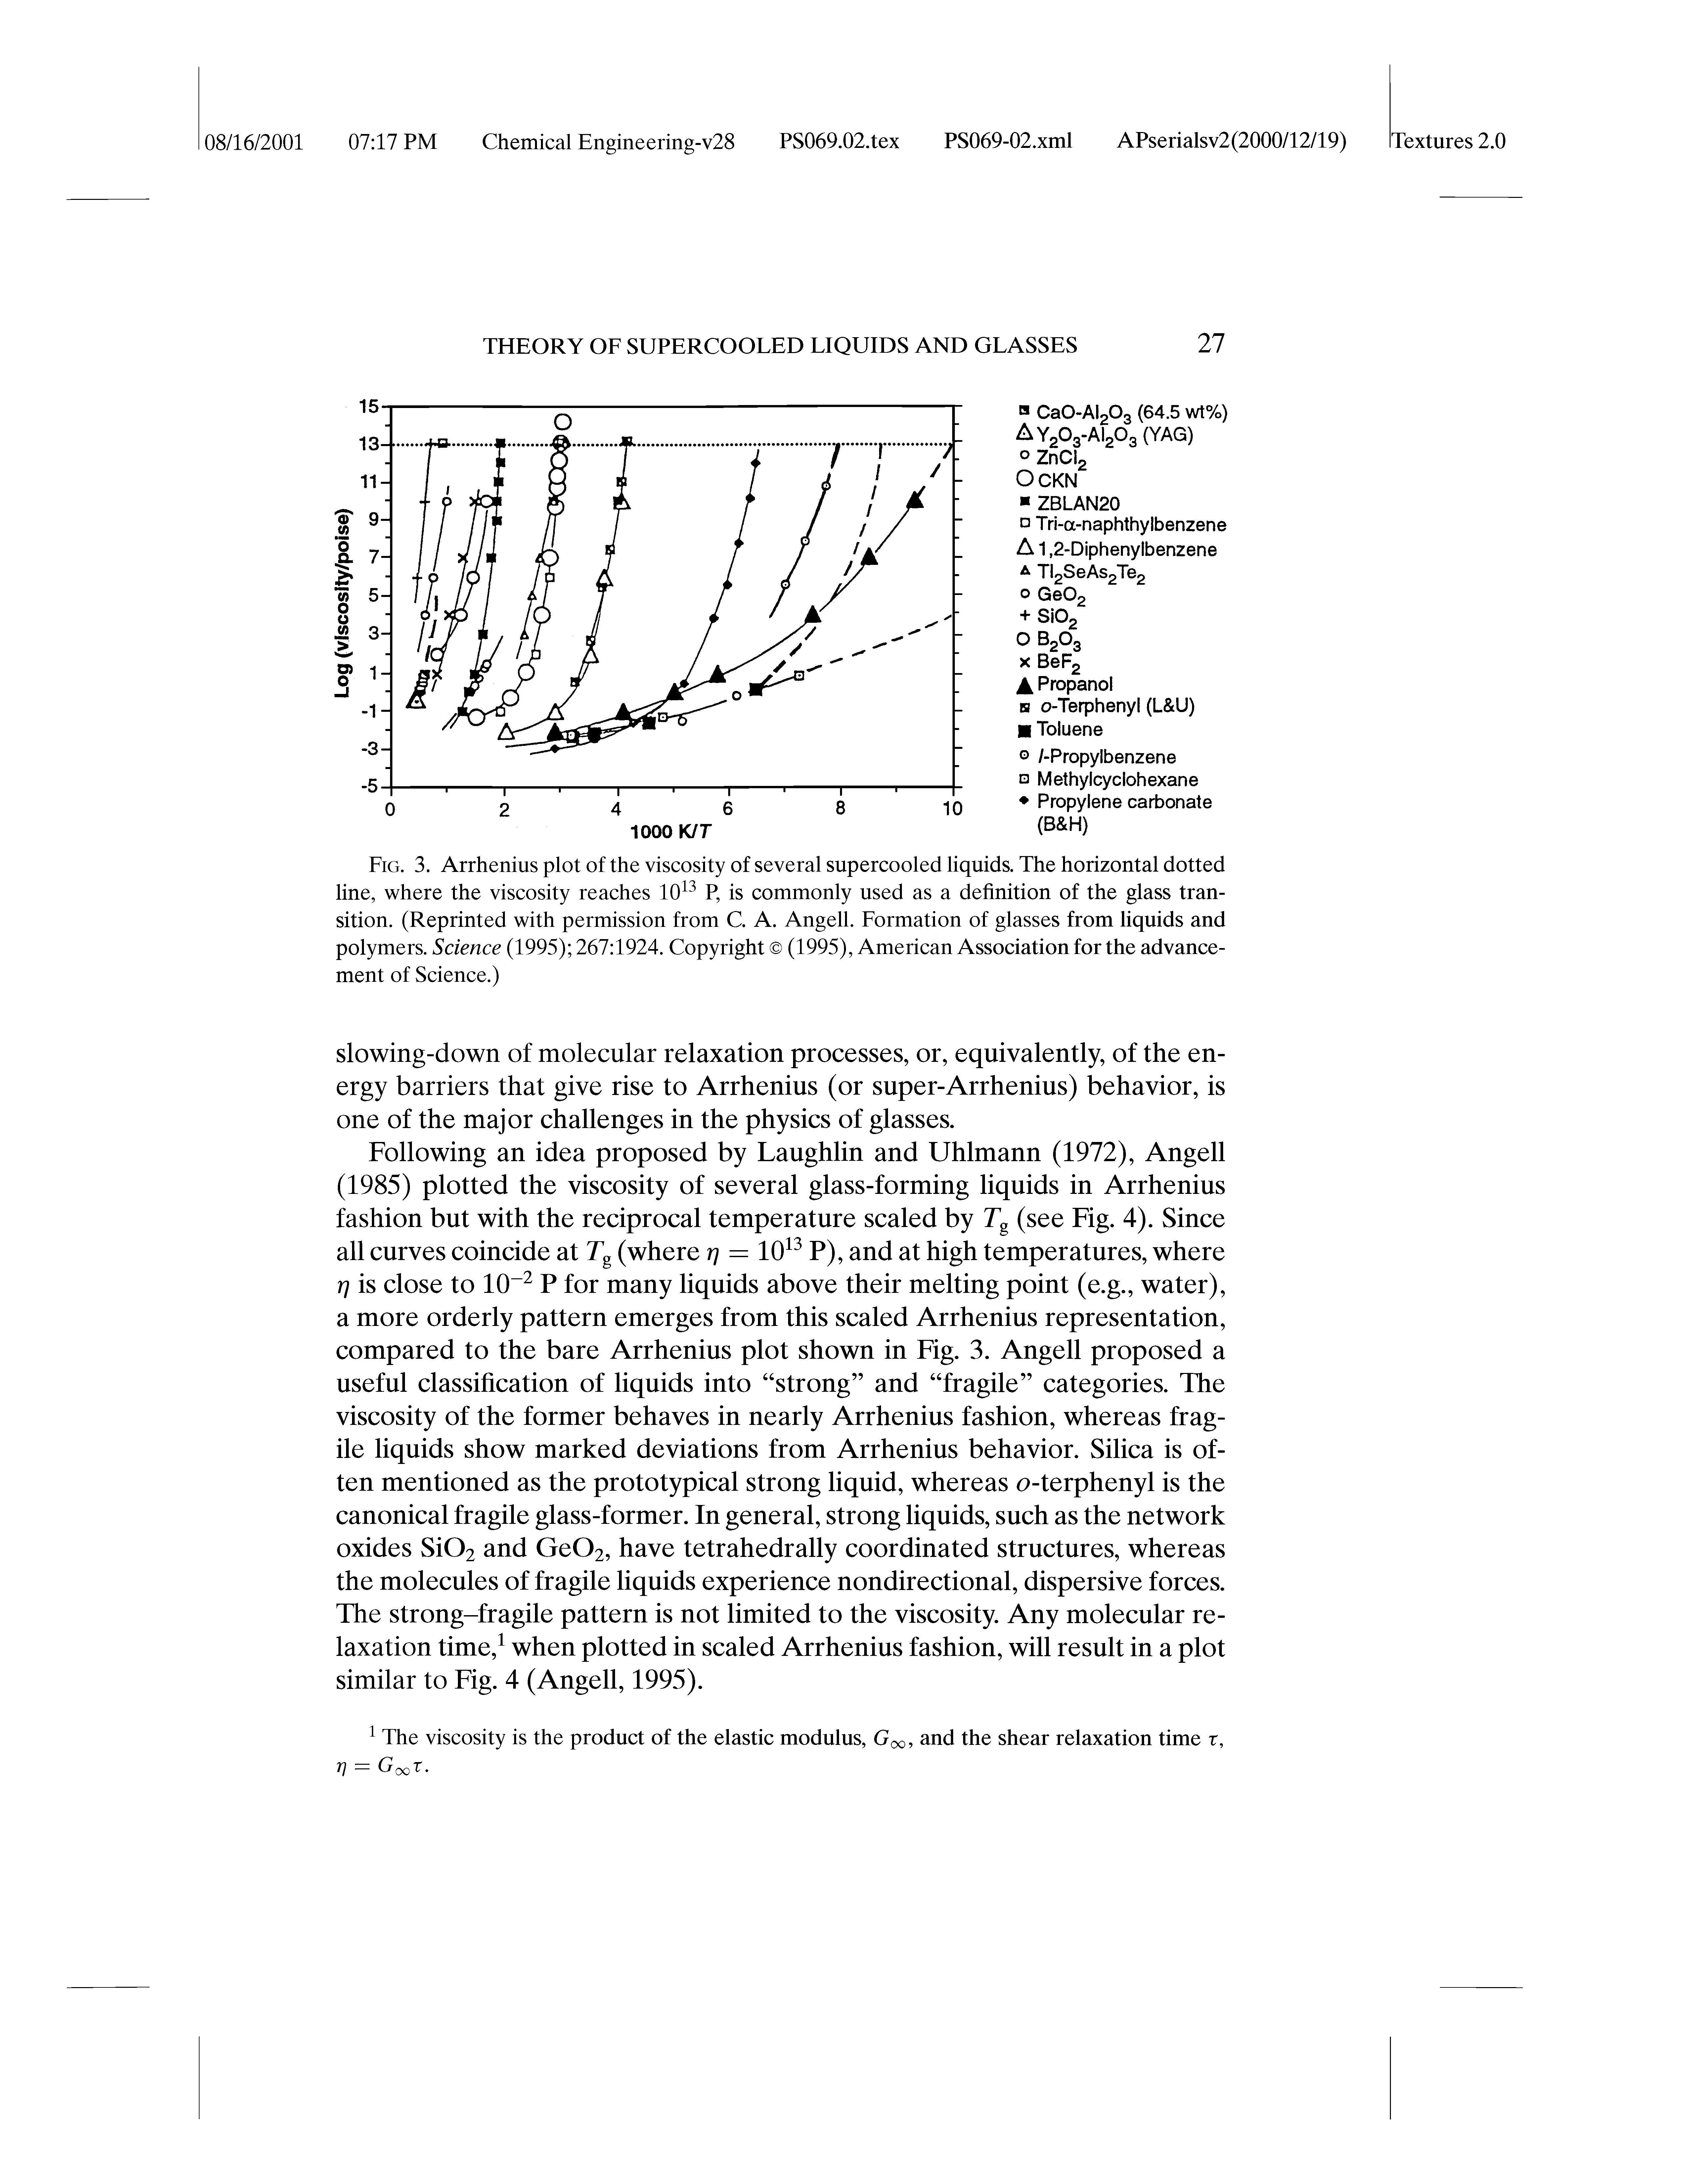 Fig. 3. Arrhenius plot of the viscosity of several supercooled liquids. The horizontal dotted line, where the viscosity reaches 10 P, is commonly used as a definition of the glass transition. (Reprinted with permission from C. A. Angell. Formation of glasses from liquids and polymers. Science (1995) 267 1924. Copyright (1995), American Association for the advancement of Science.)...